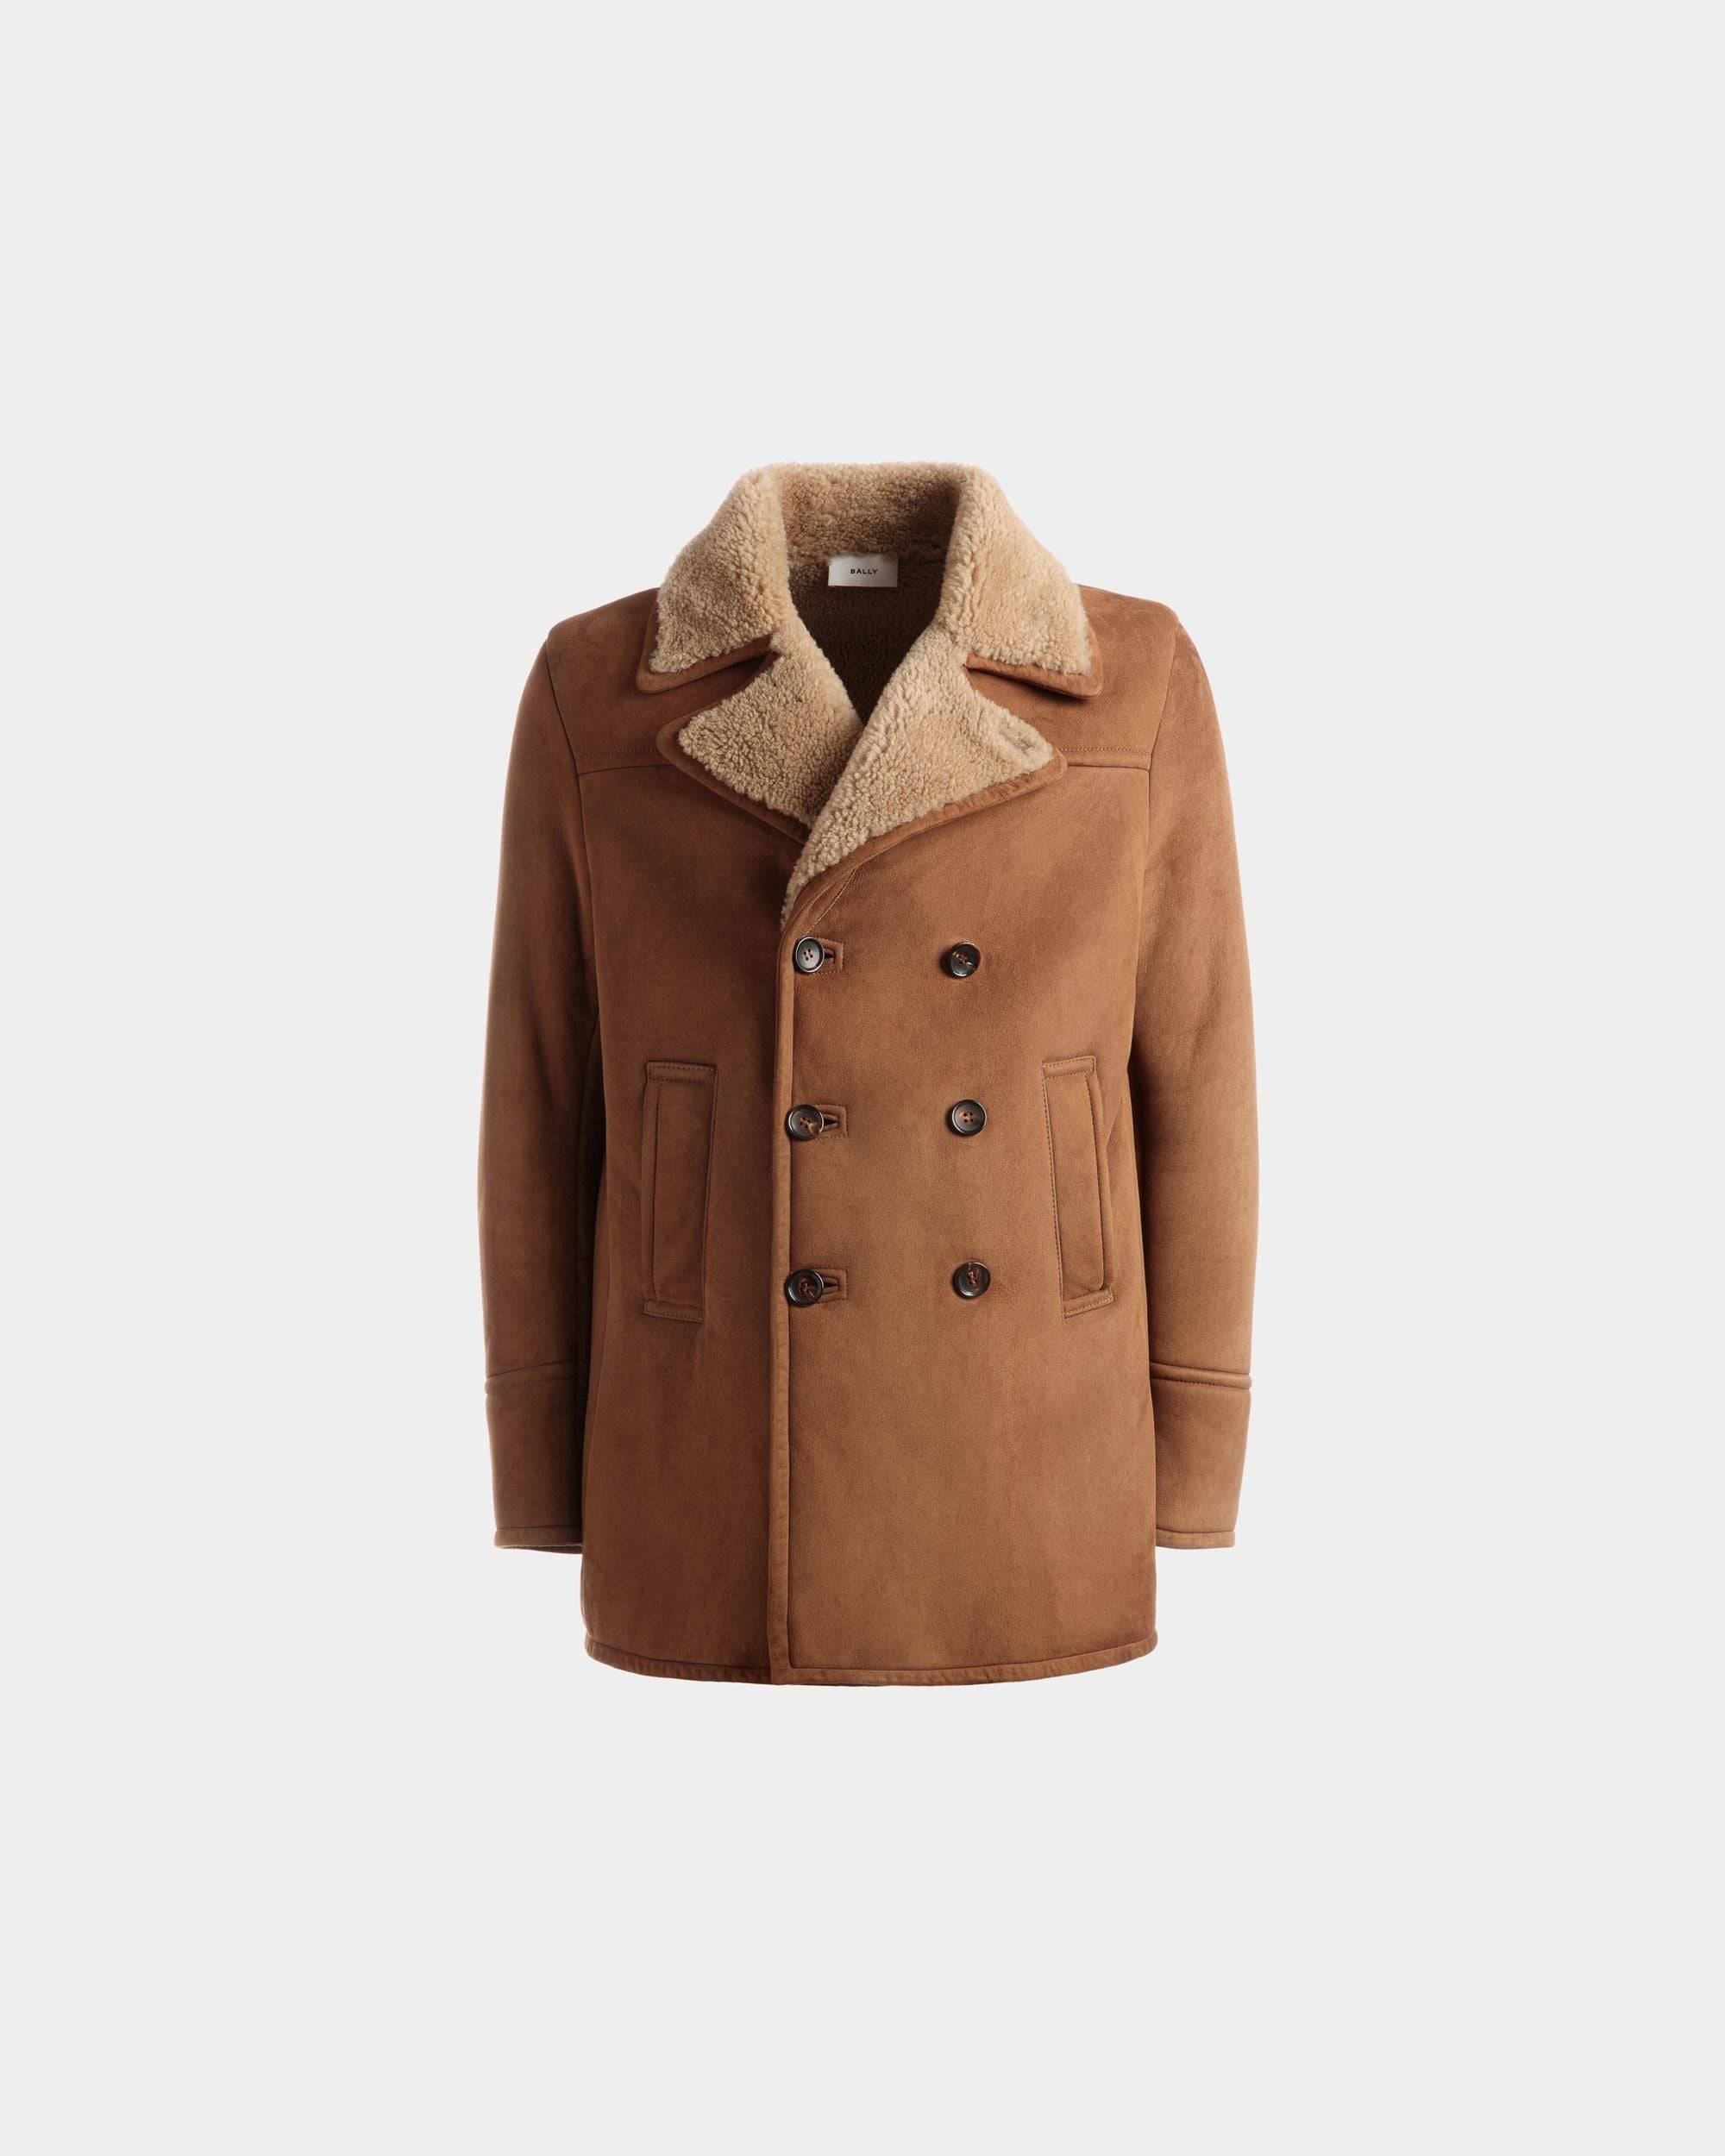 Men's Double Breasted Shearling Coat In Brown Suede | Bally | Still Life Front